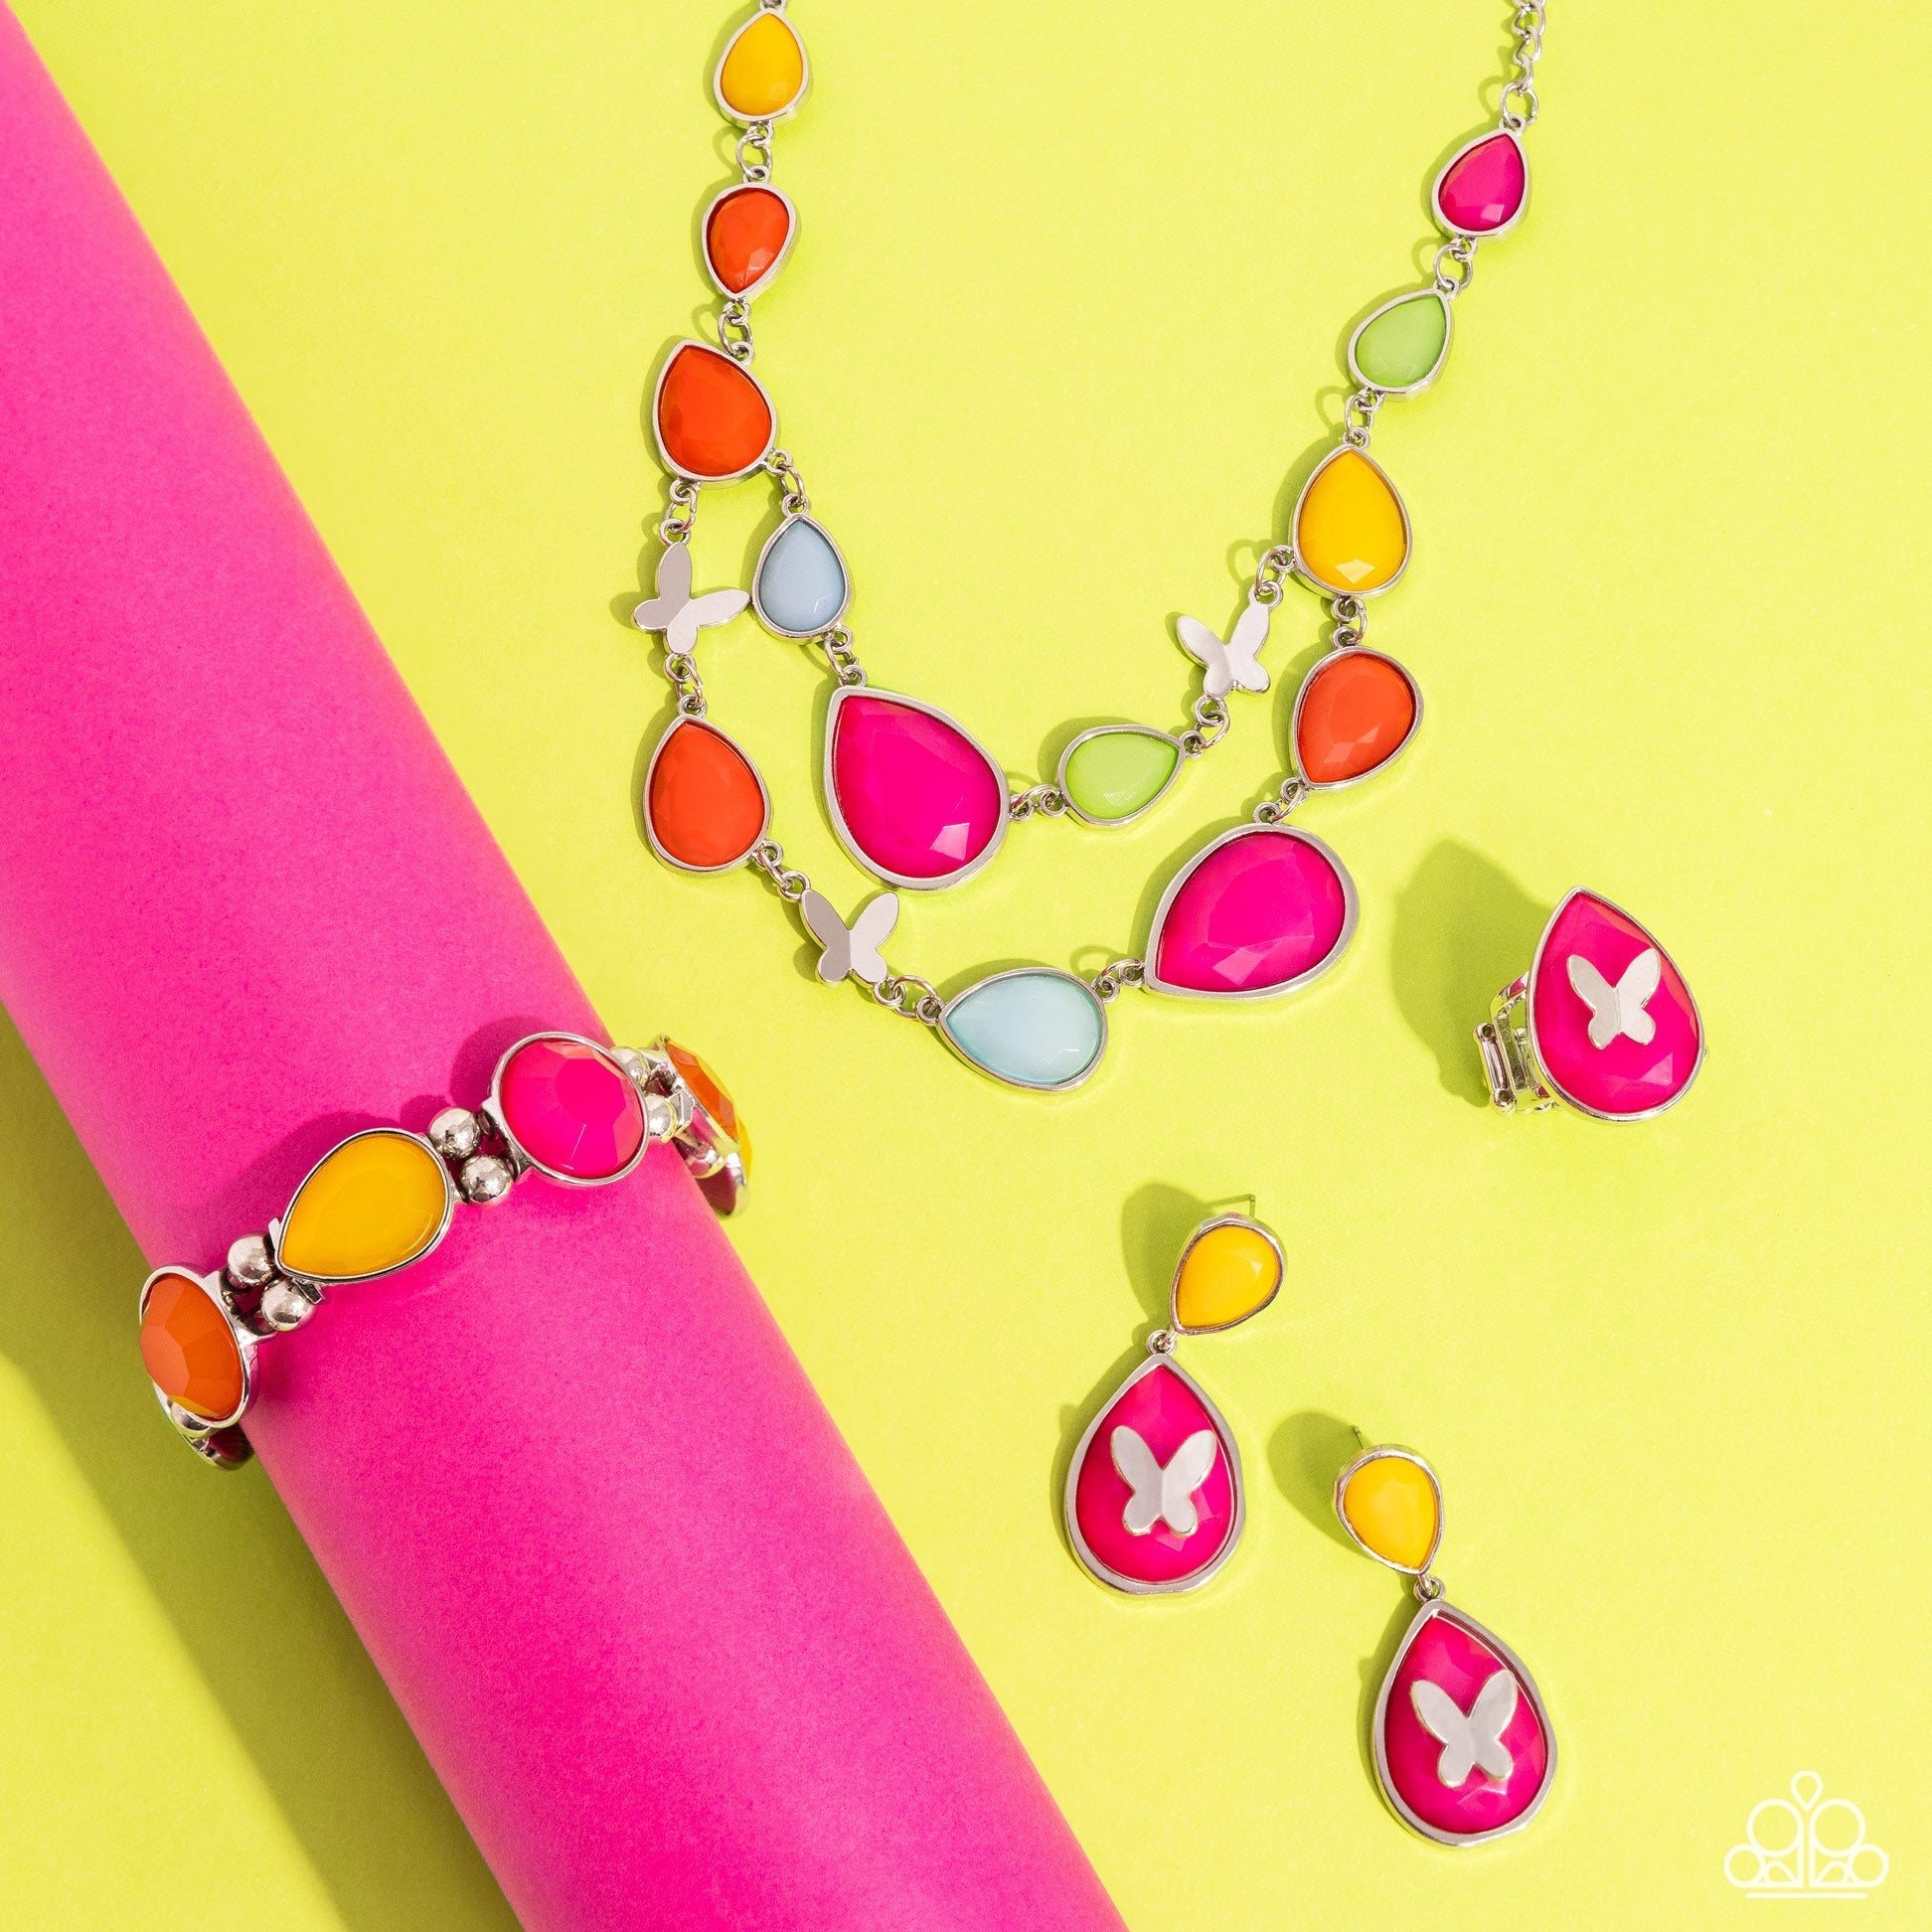 Glimpses of Malibu - Colorful Jewelry Set - Paparazzi Accessories - Includes one of each accessory featured in the Glimpses of Malibu Trend Blend in January's Fashion Fix:  BRIGHT Club - Multi Necklace, BRIGHT This 'Sway' - Multi Post Earrings, In All the BRIGHT Places - Multi Bracelet,  In Plain BRIGHT - Pink Ring.